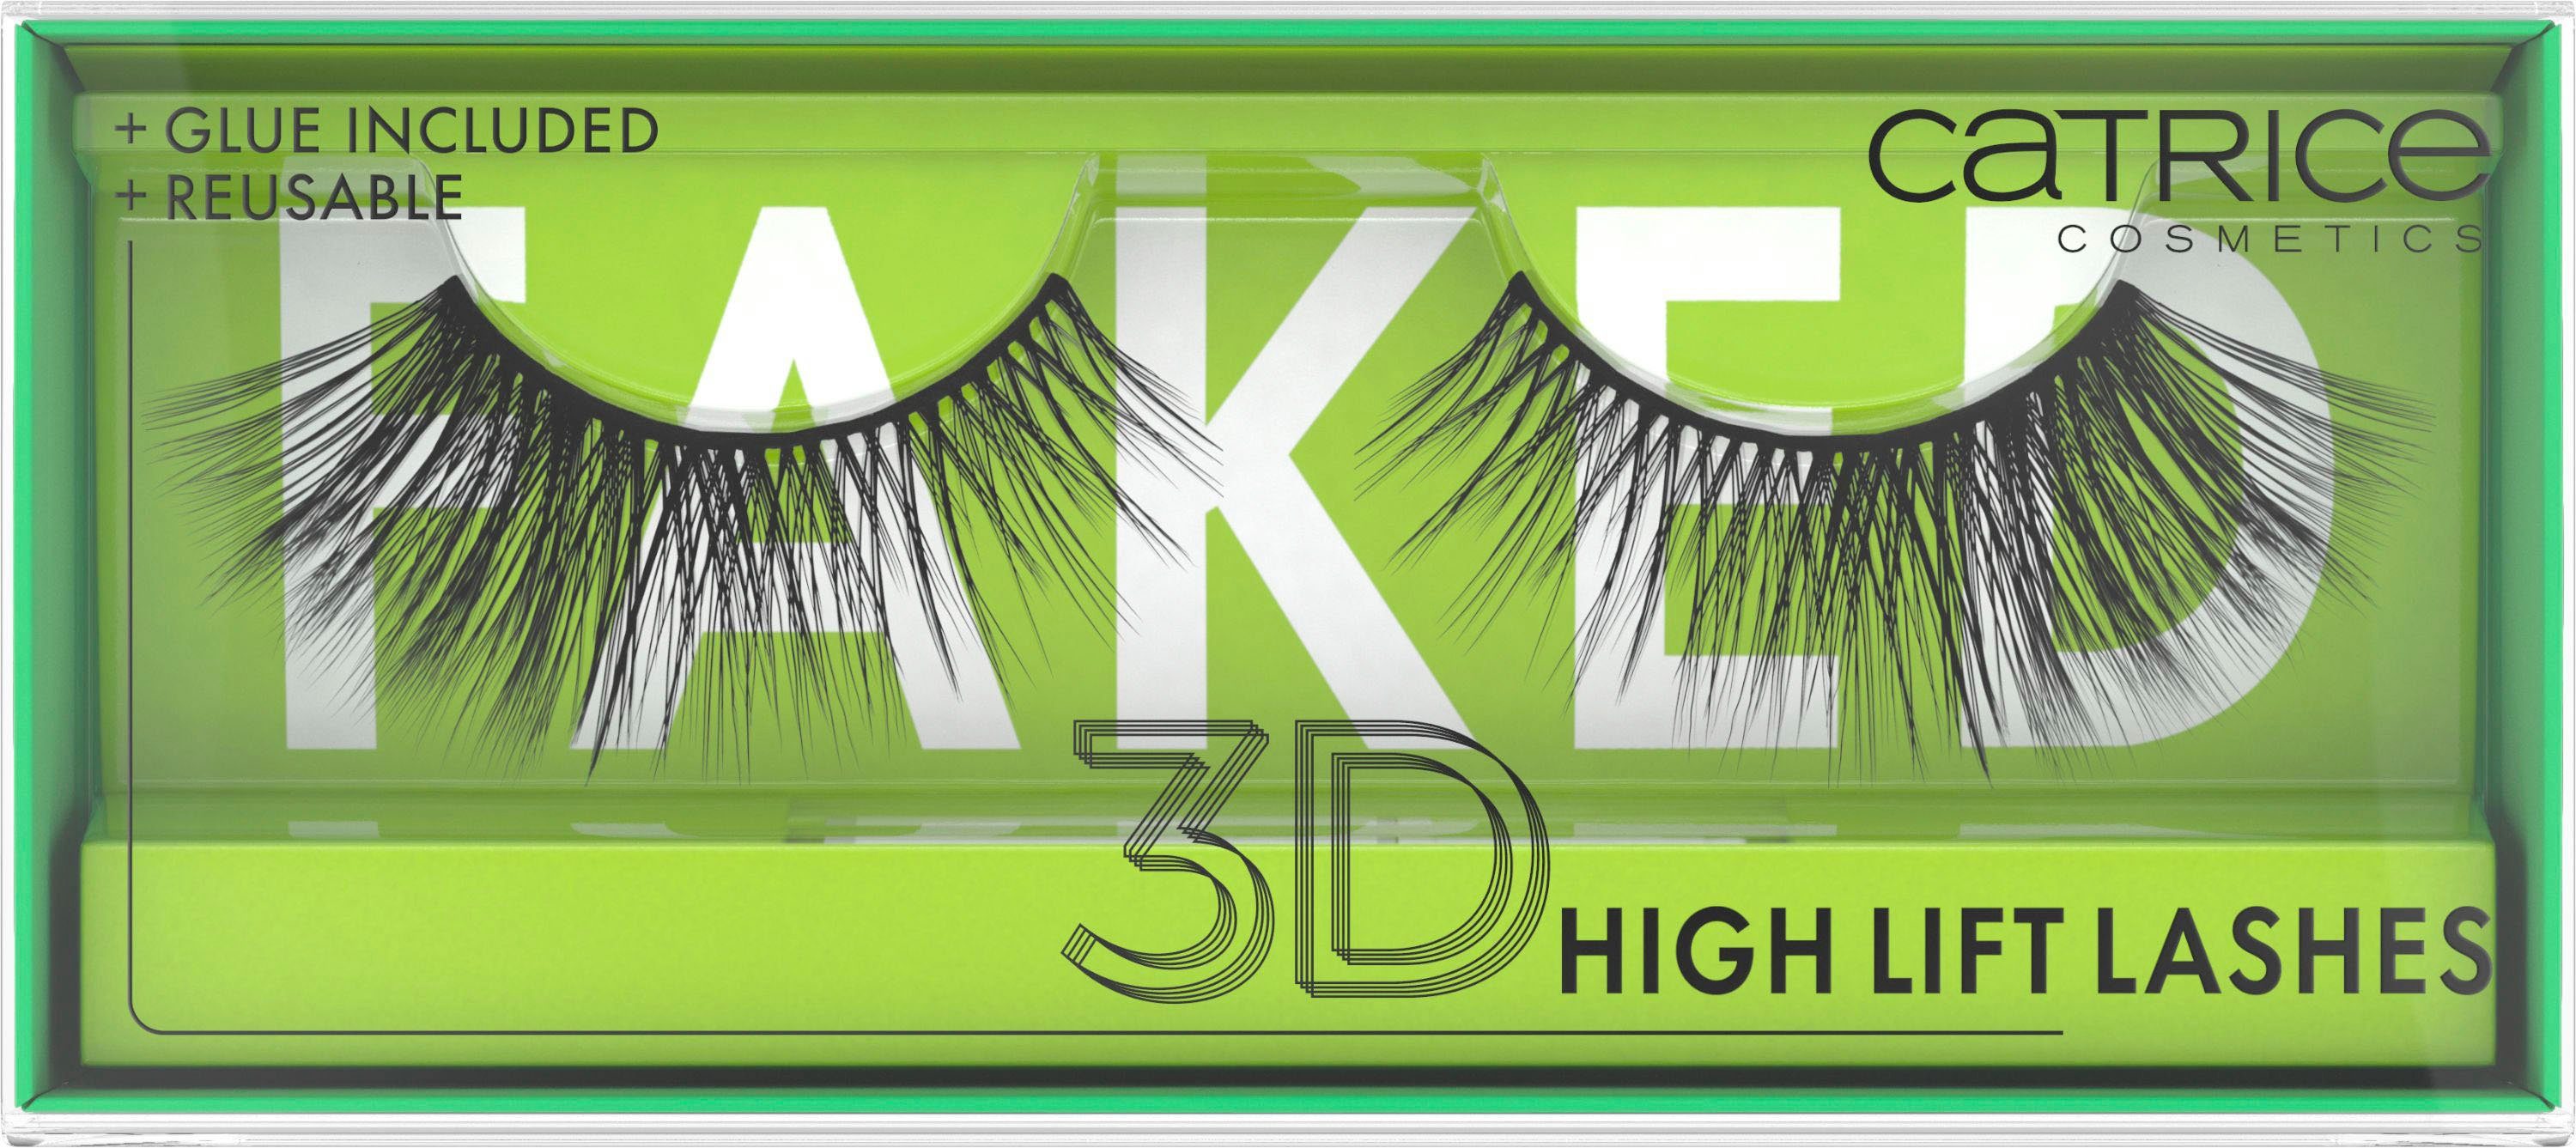 Catrice Bandwimpern High Faked Lashes, Set, Lift 3D 3